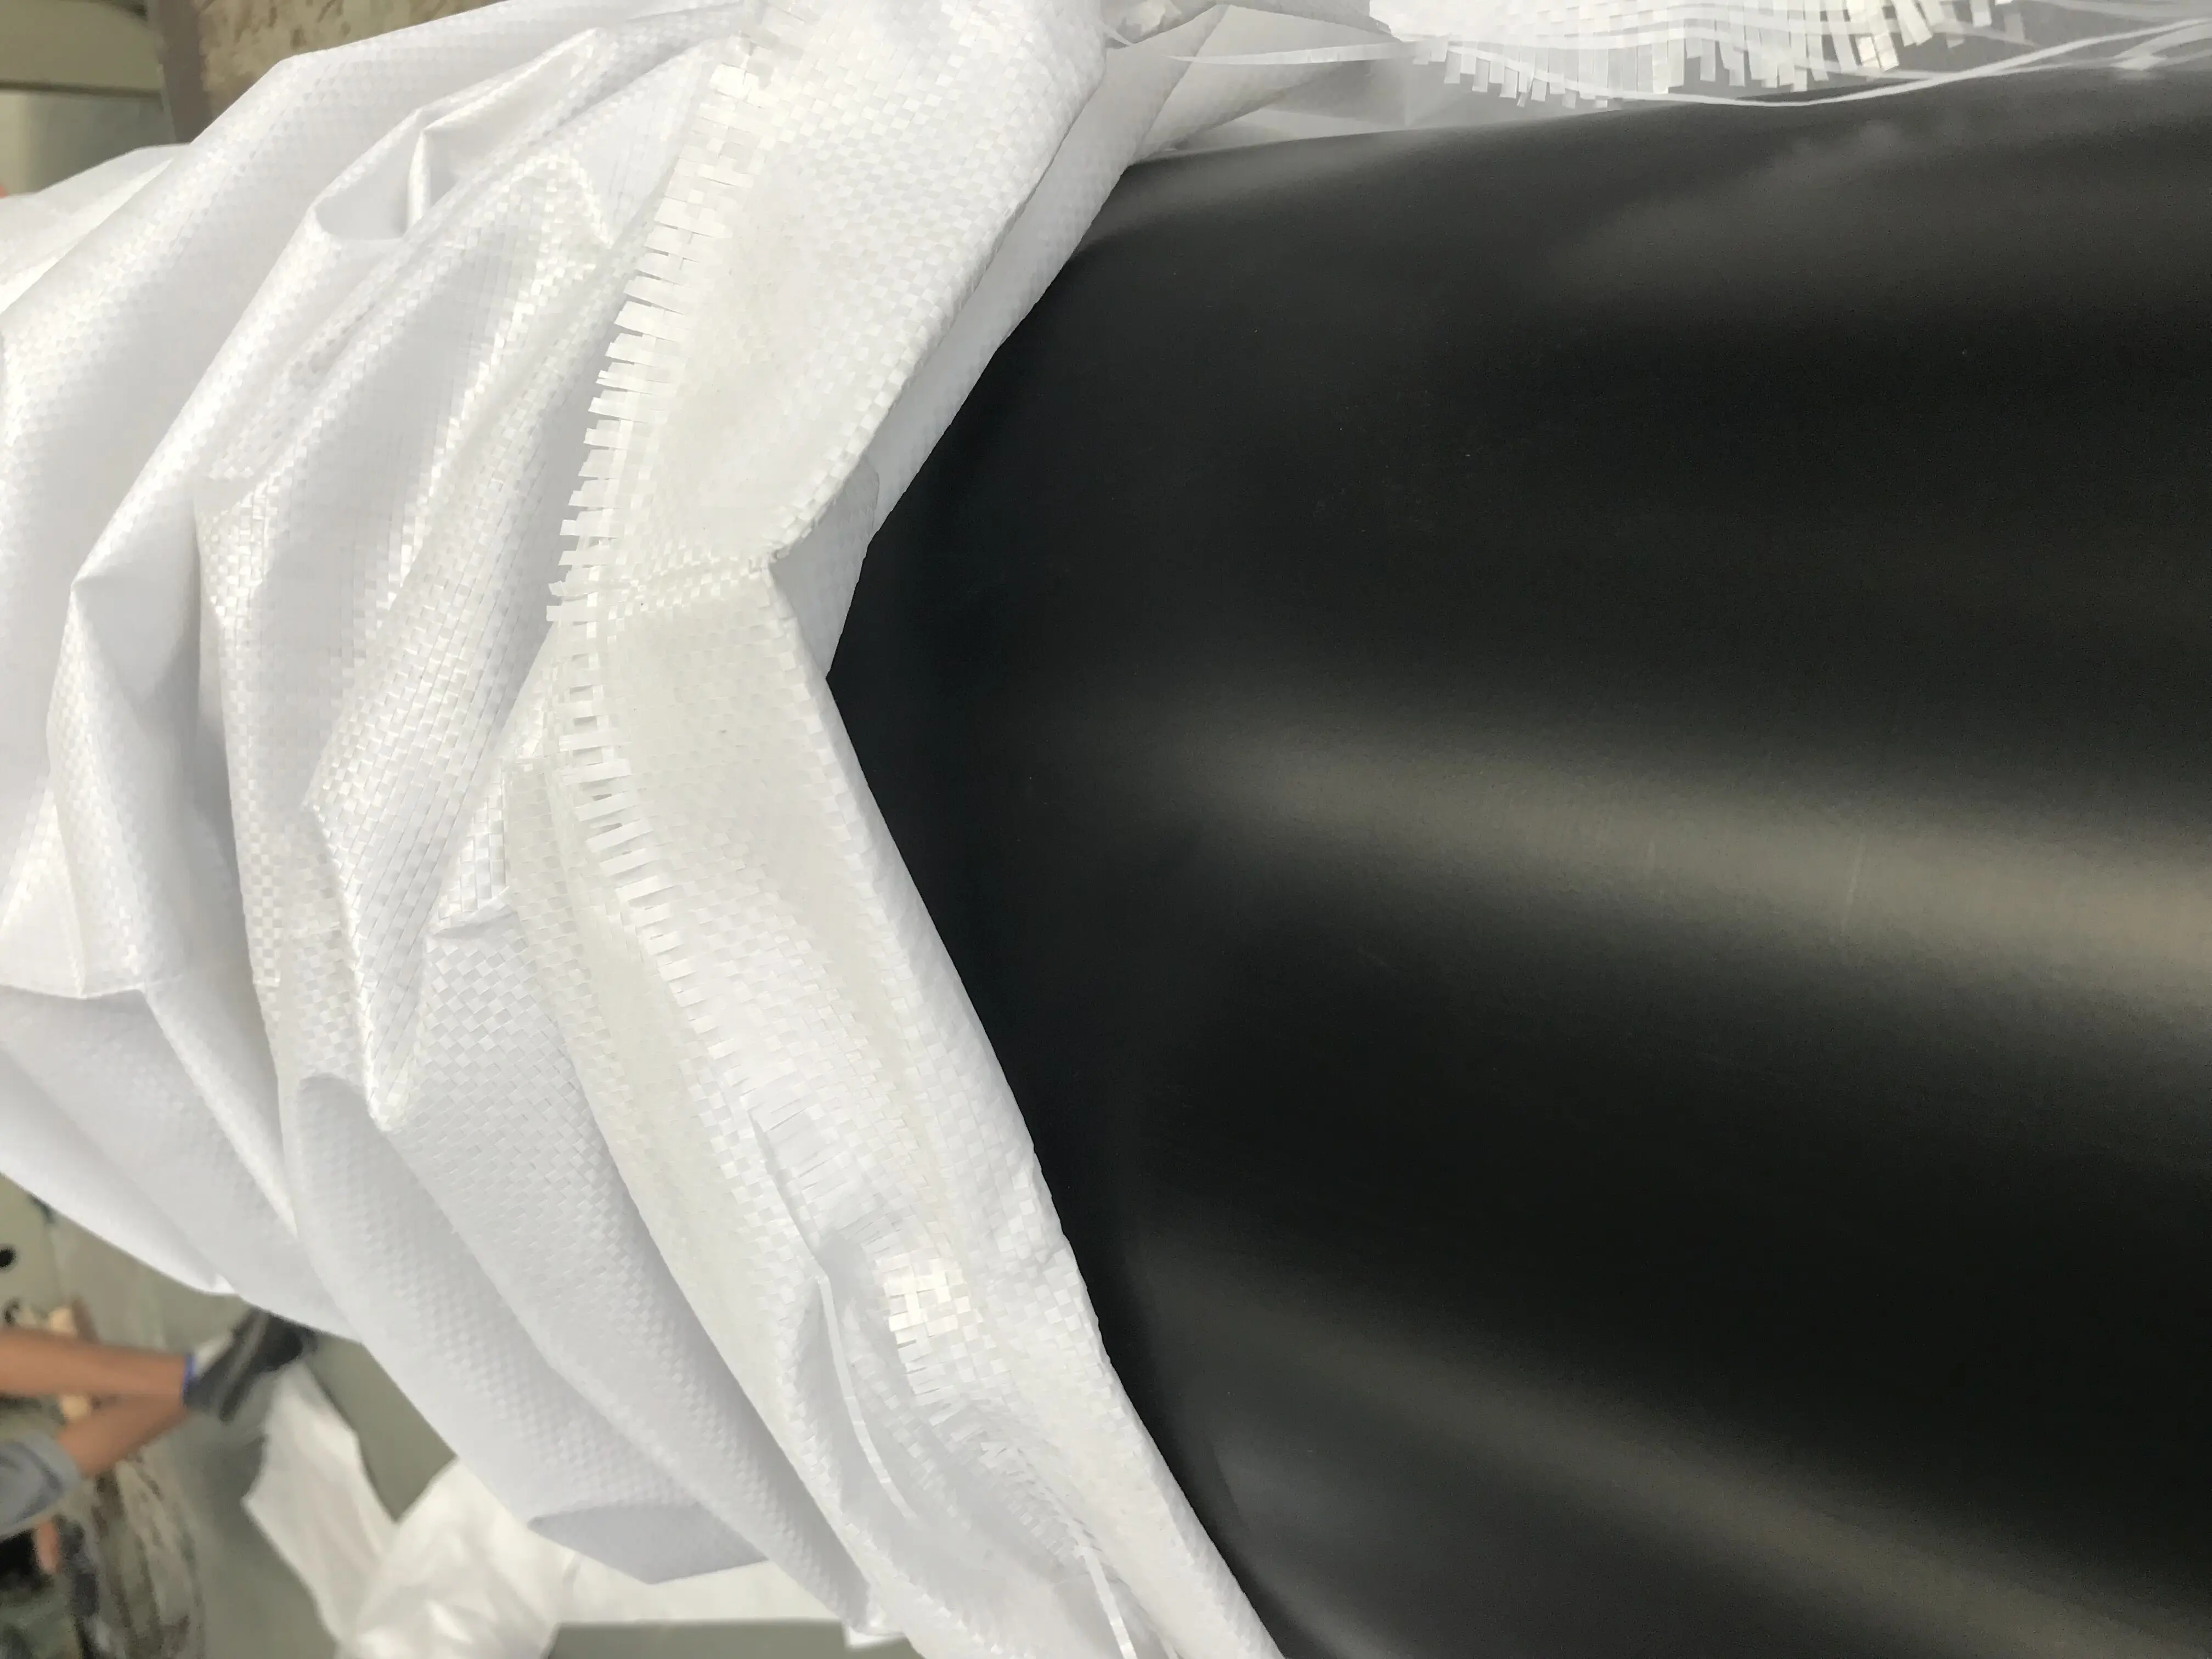 Hdpe Geomembrane Liner For Landfill - Buy Hdpe Geomembrane,Geomembrane ...